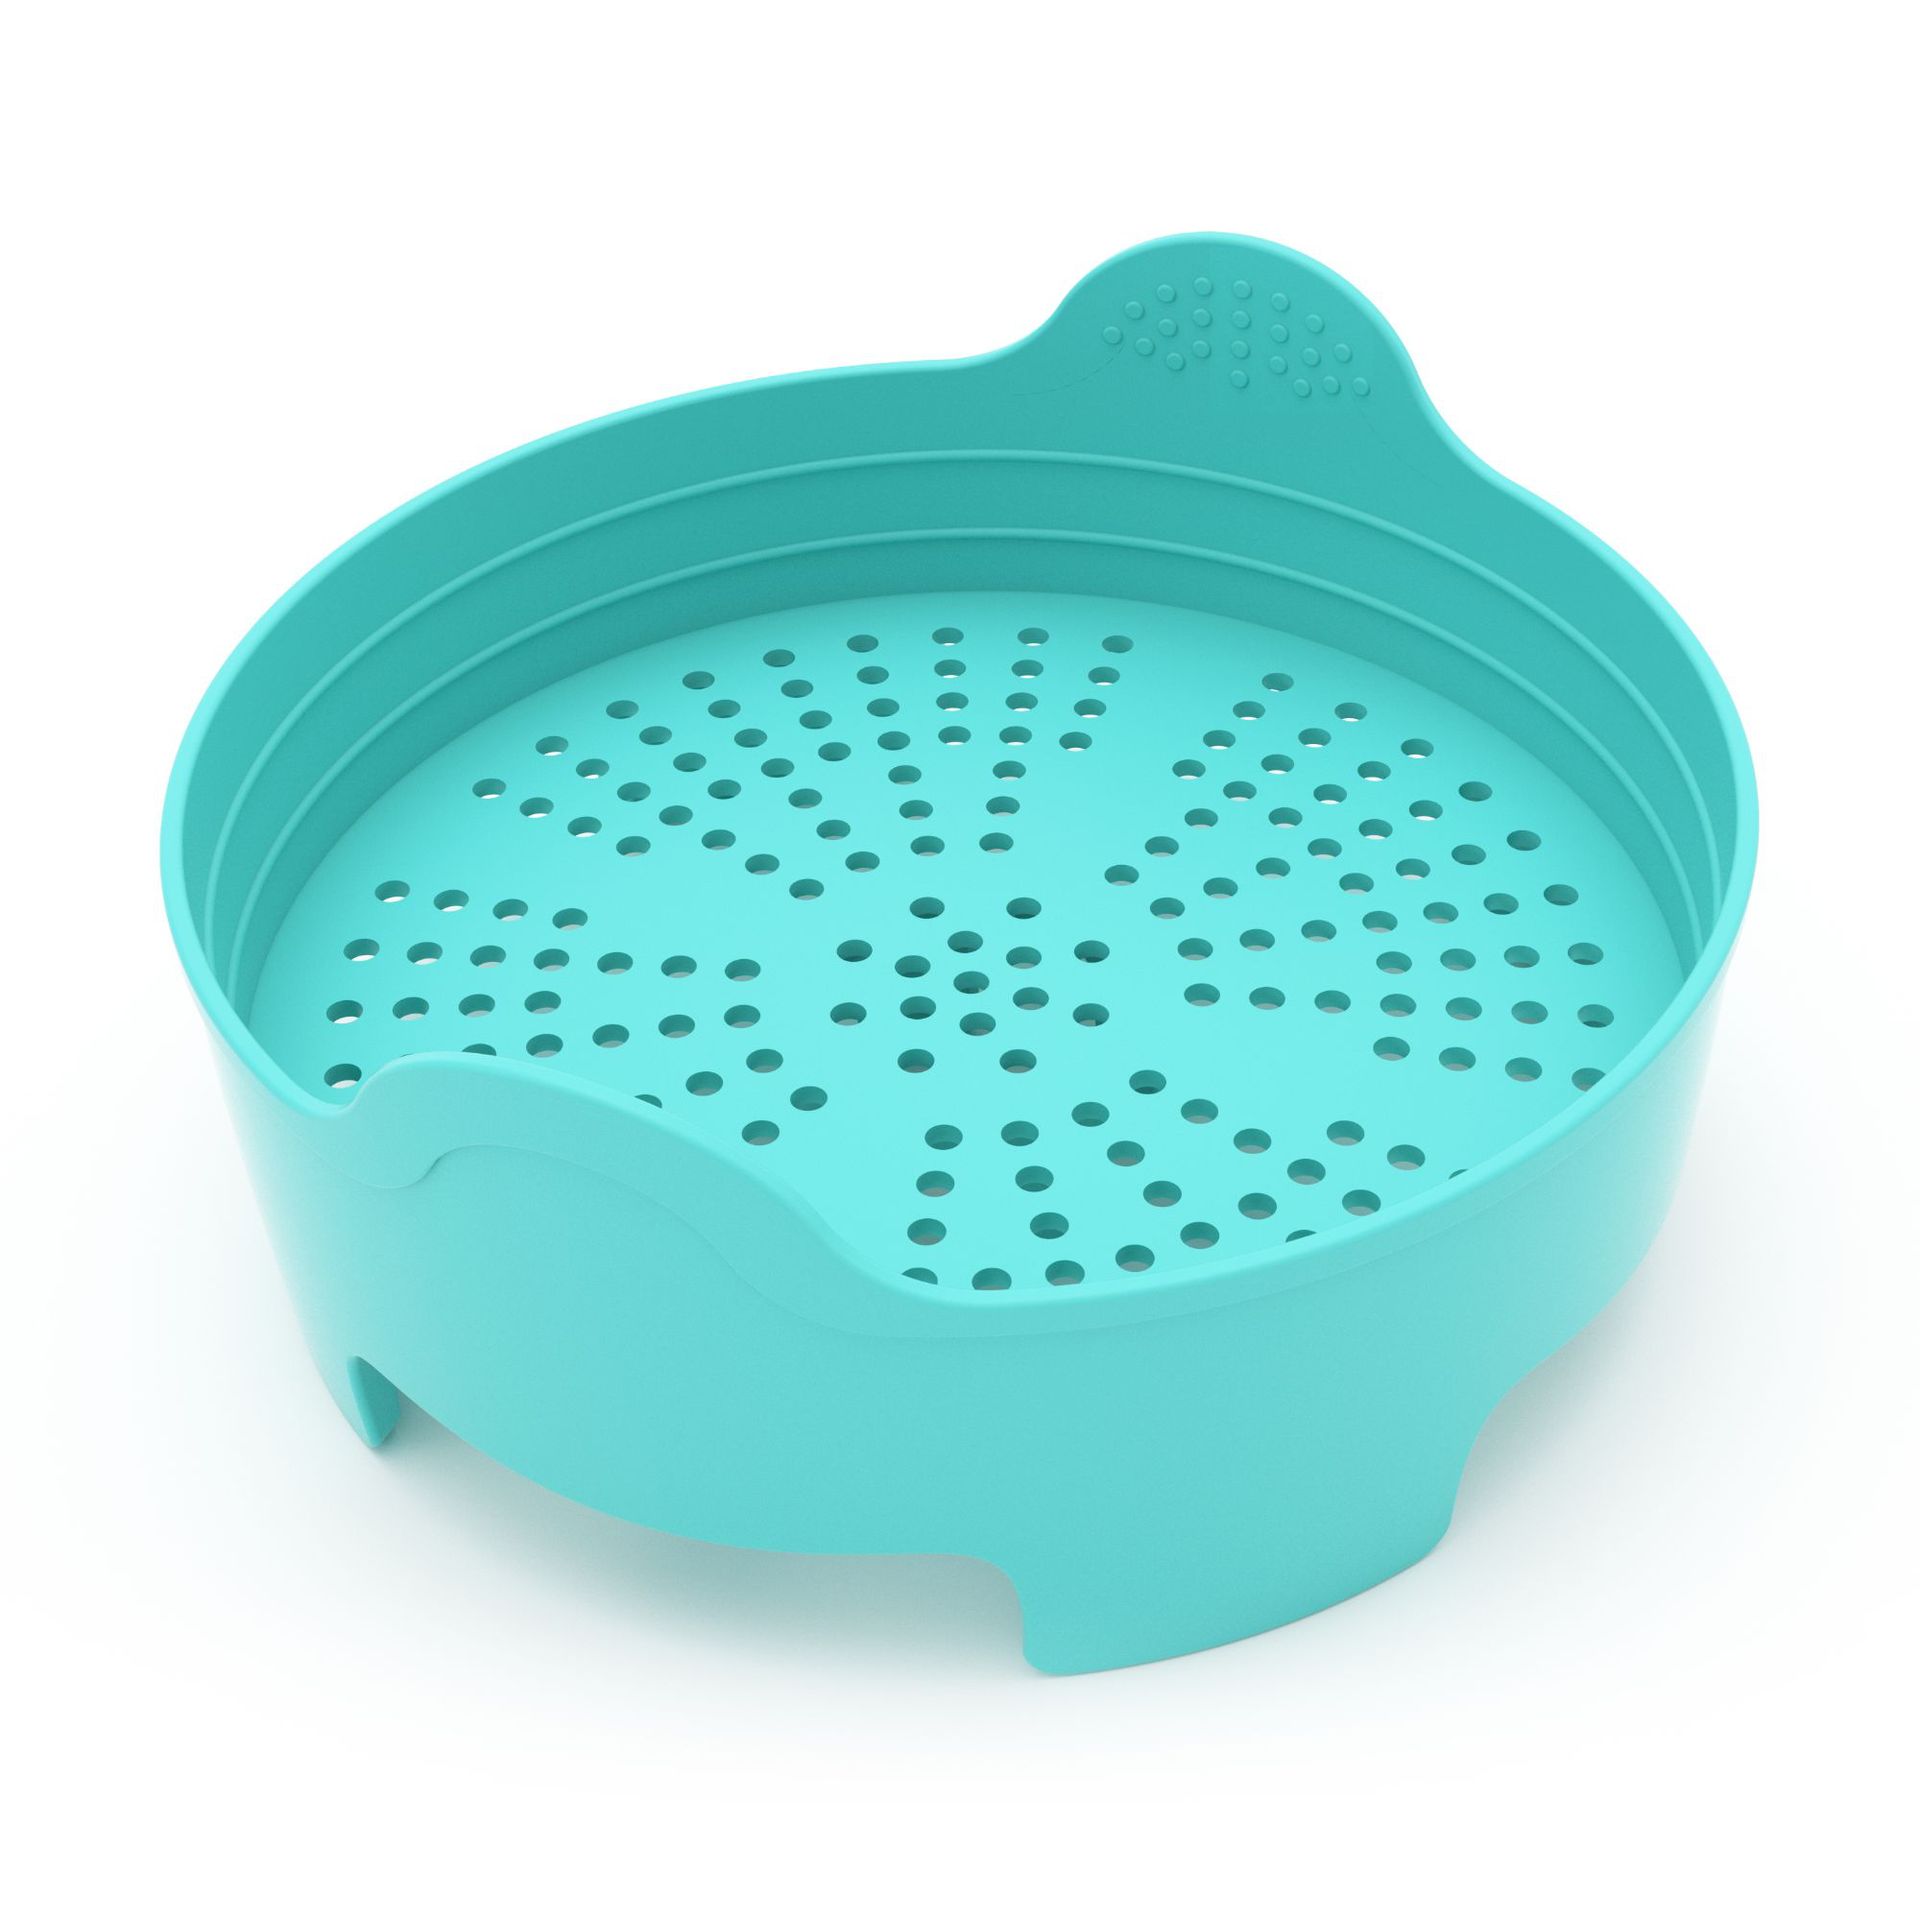 New Multifunctional Silicone Steamer Folding Storage Steamer Steamer Bun Xiao Long Bao Silicone Steamer